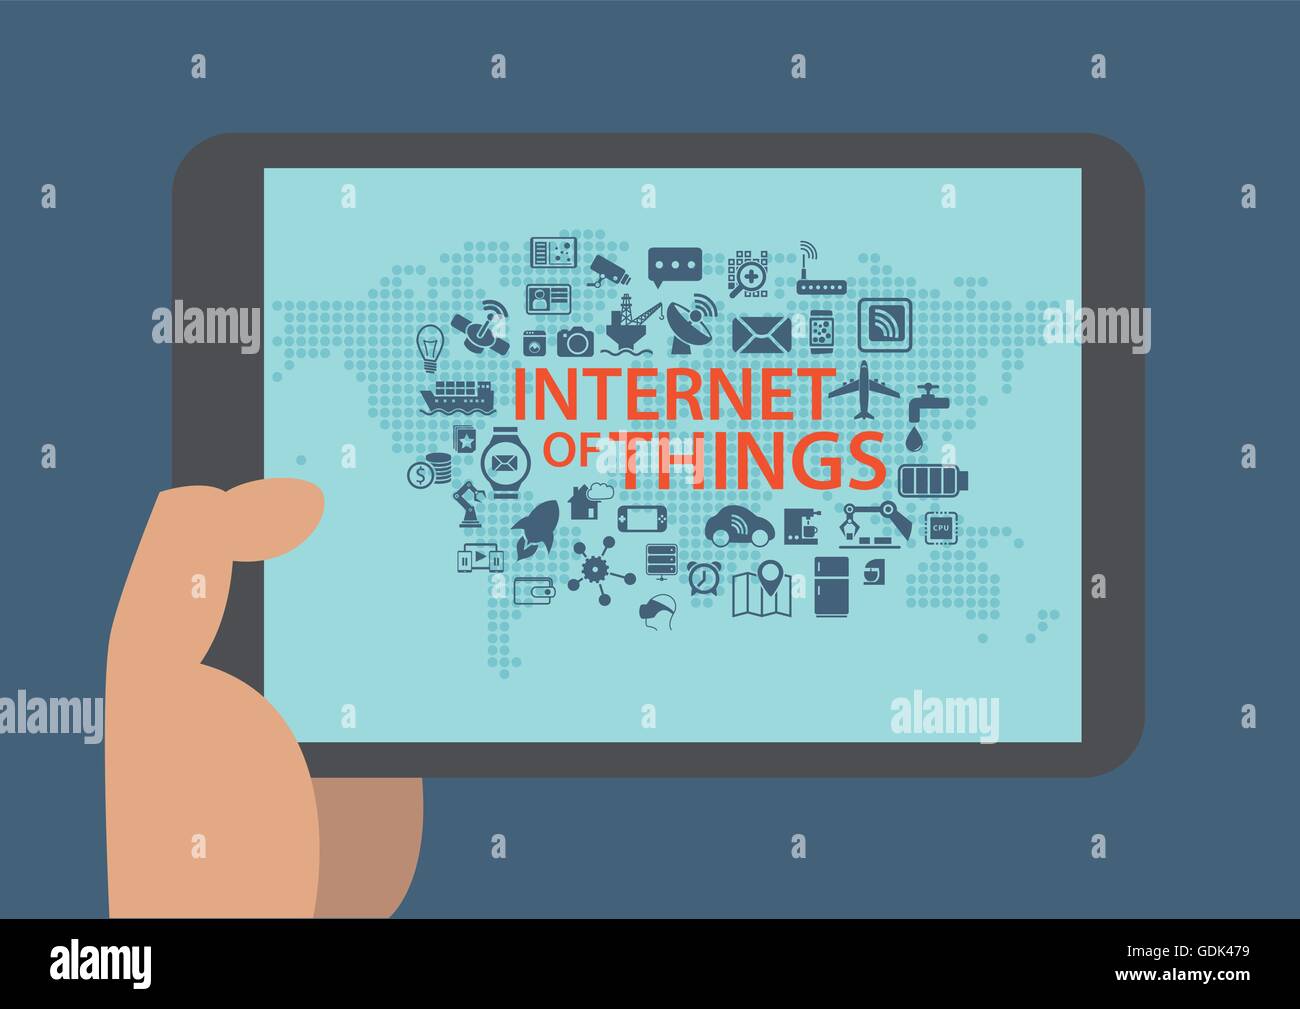 Internet of things vector infographic Stock Vector